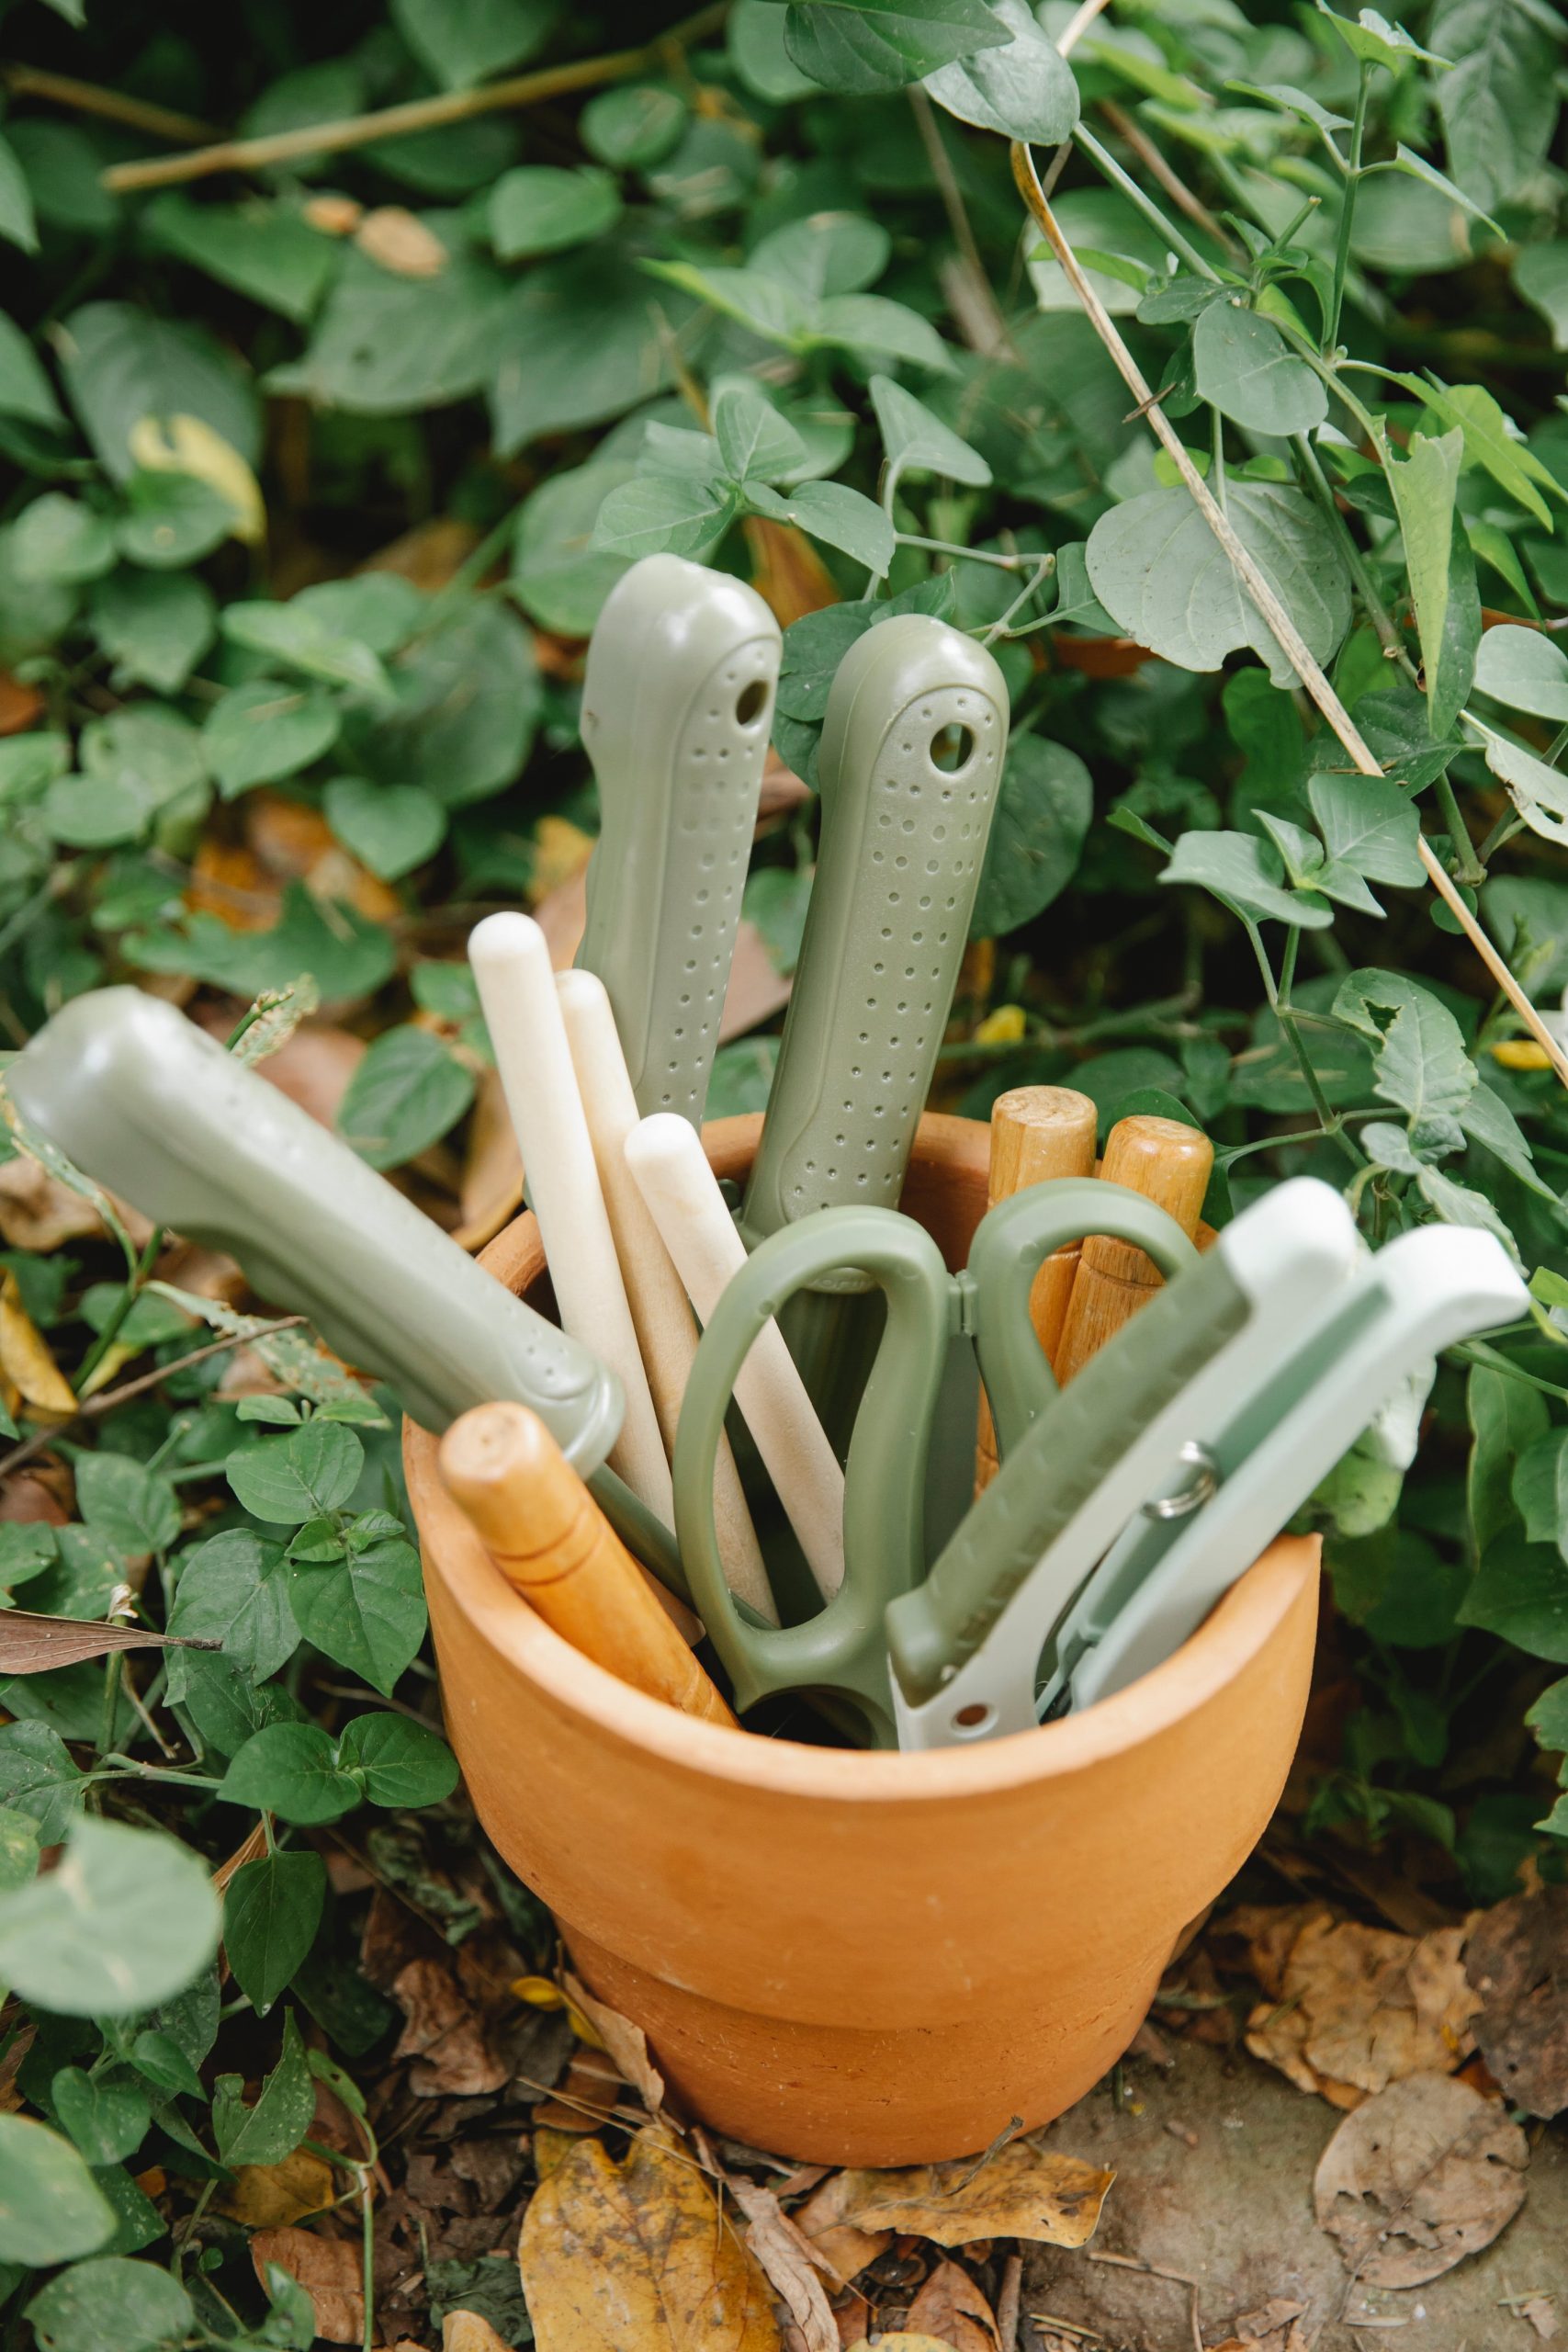 A set of gardening tools